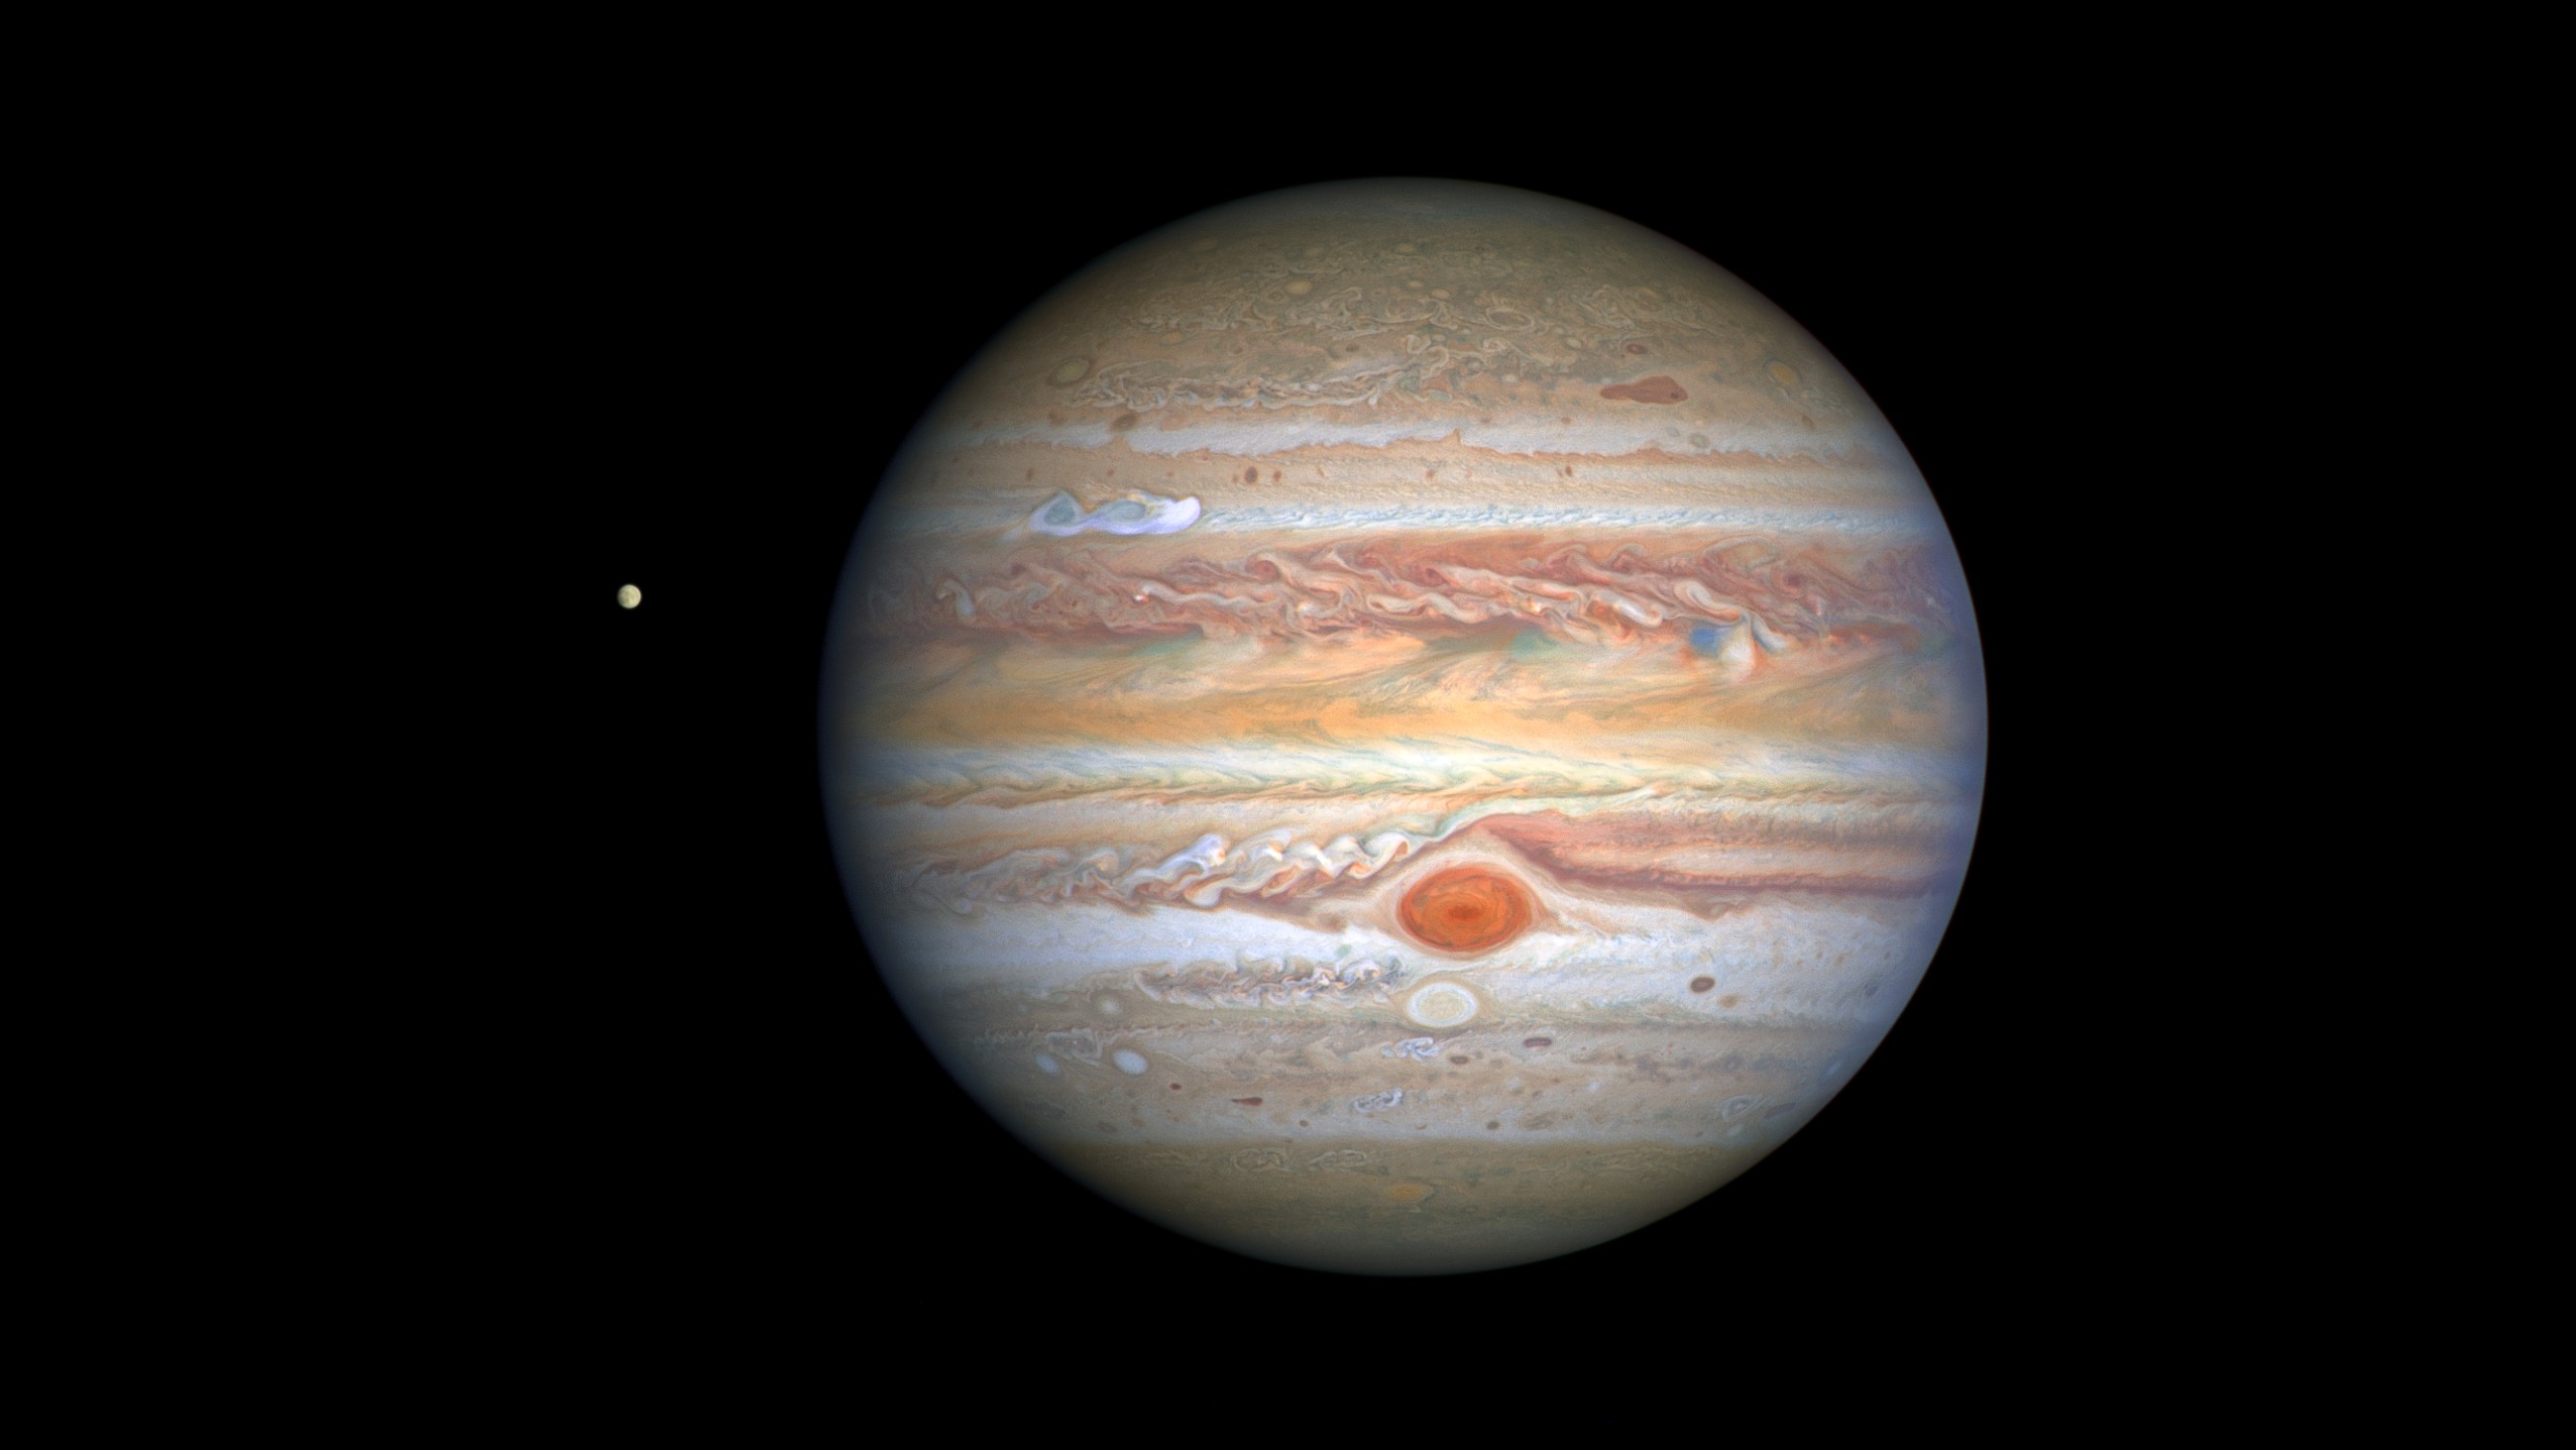 Image of Jupiter shows bands of orange and yellow sweeping across the surface.